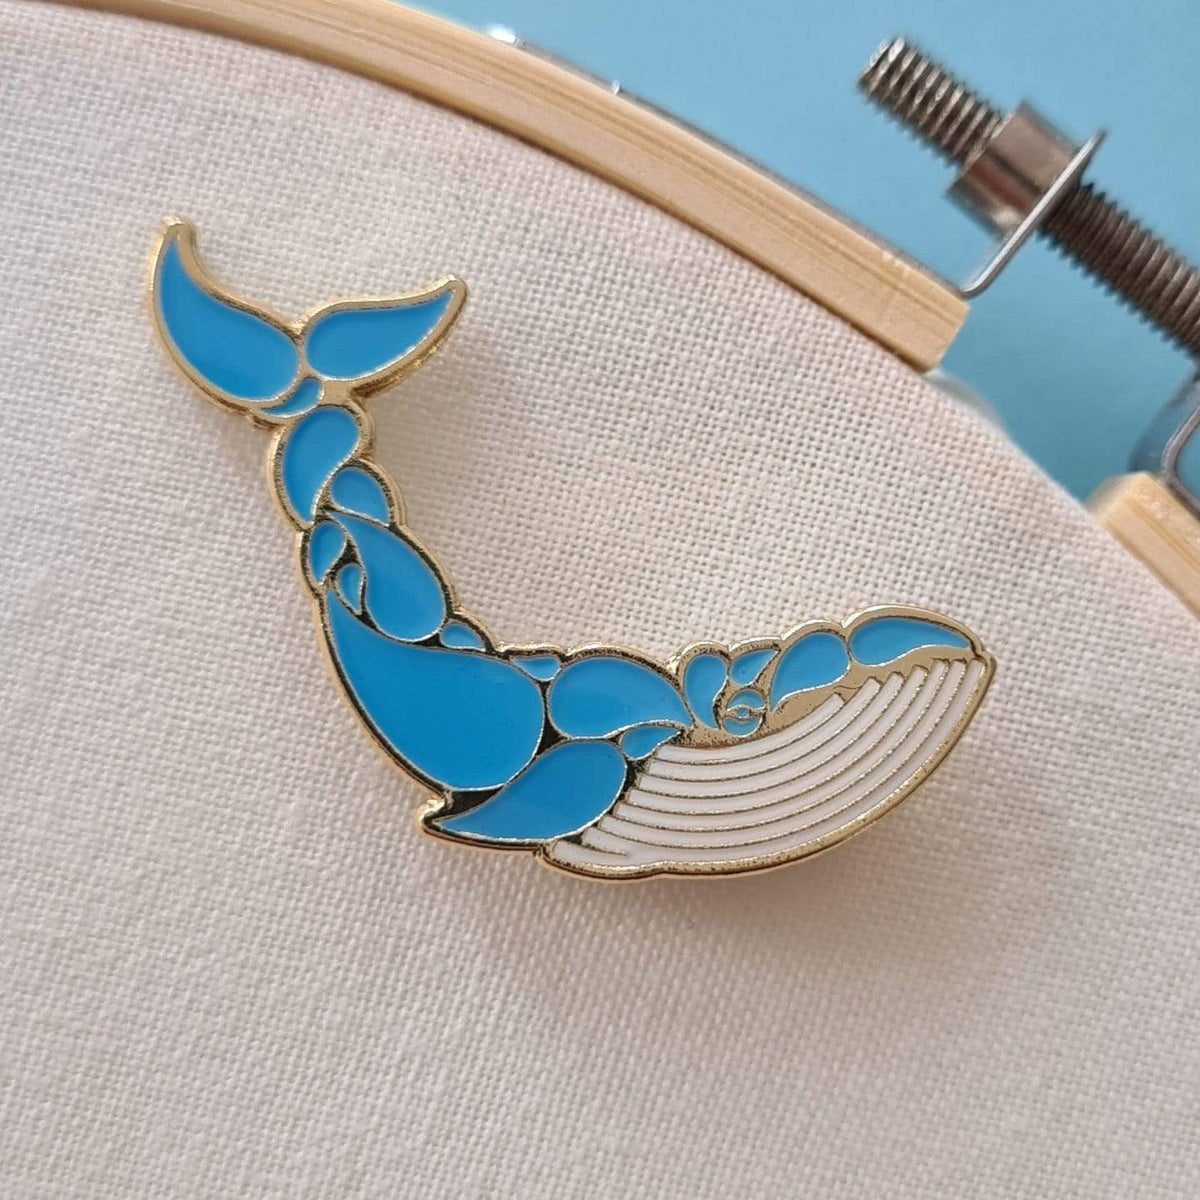 Paraffle Embroidery Supplies &amp; Accessories Whale Magnetic Needle Minder